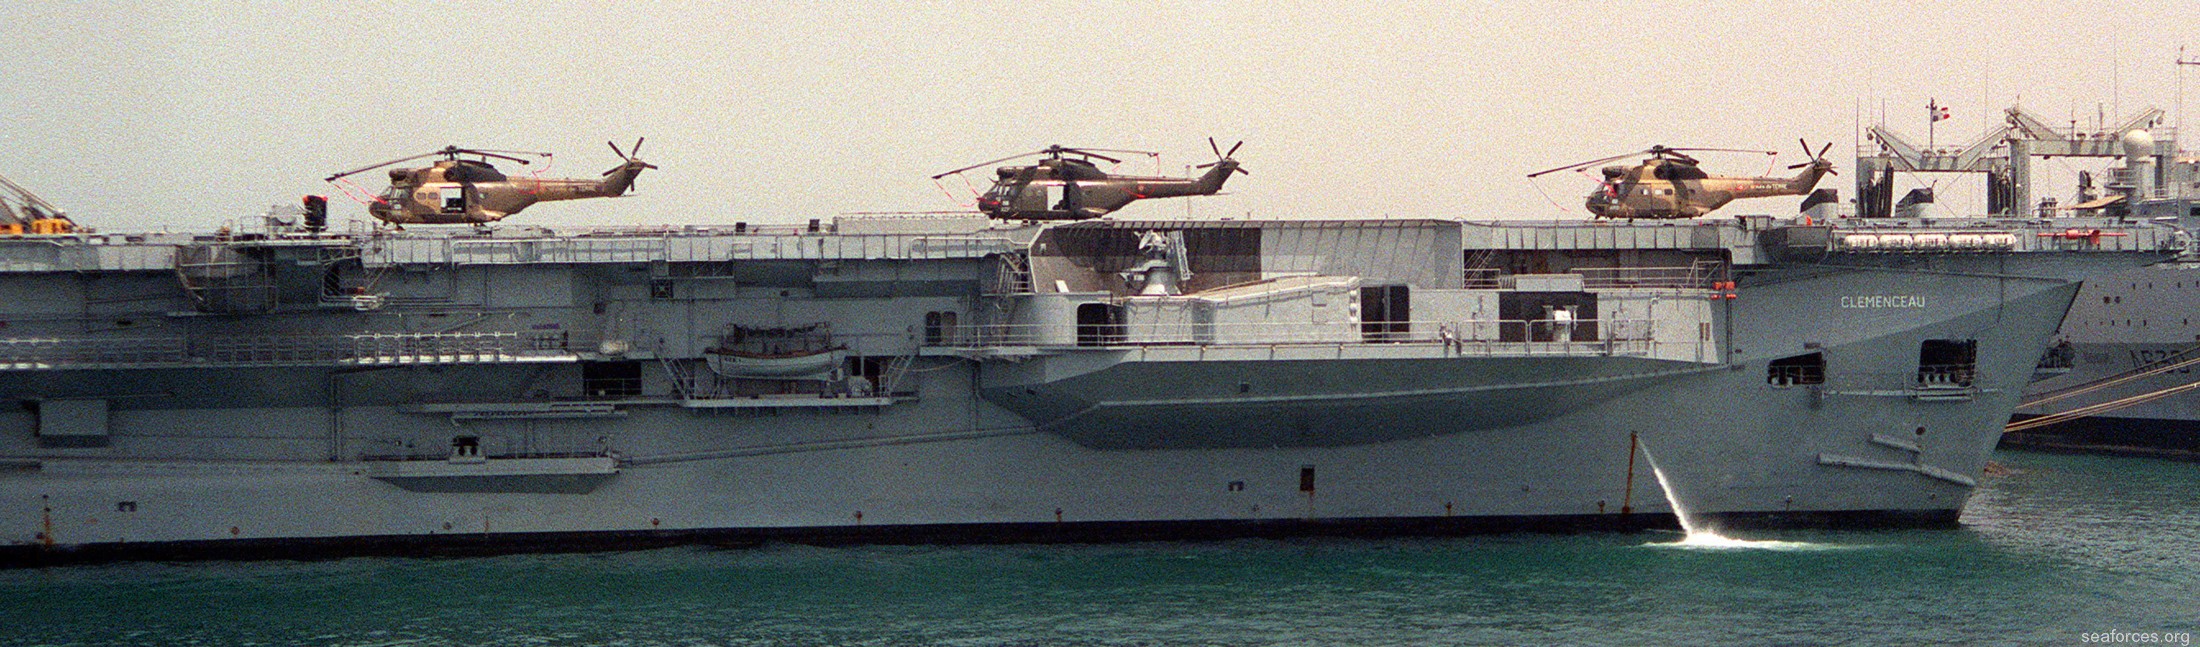 r-98 fs clemenceau aircraft carrier french navy marine nationale 06 operation desert shield 1990